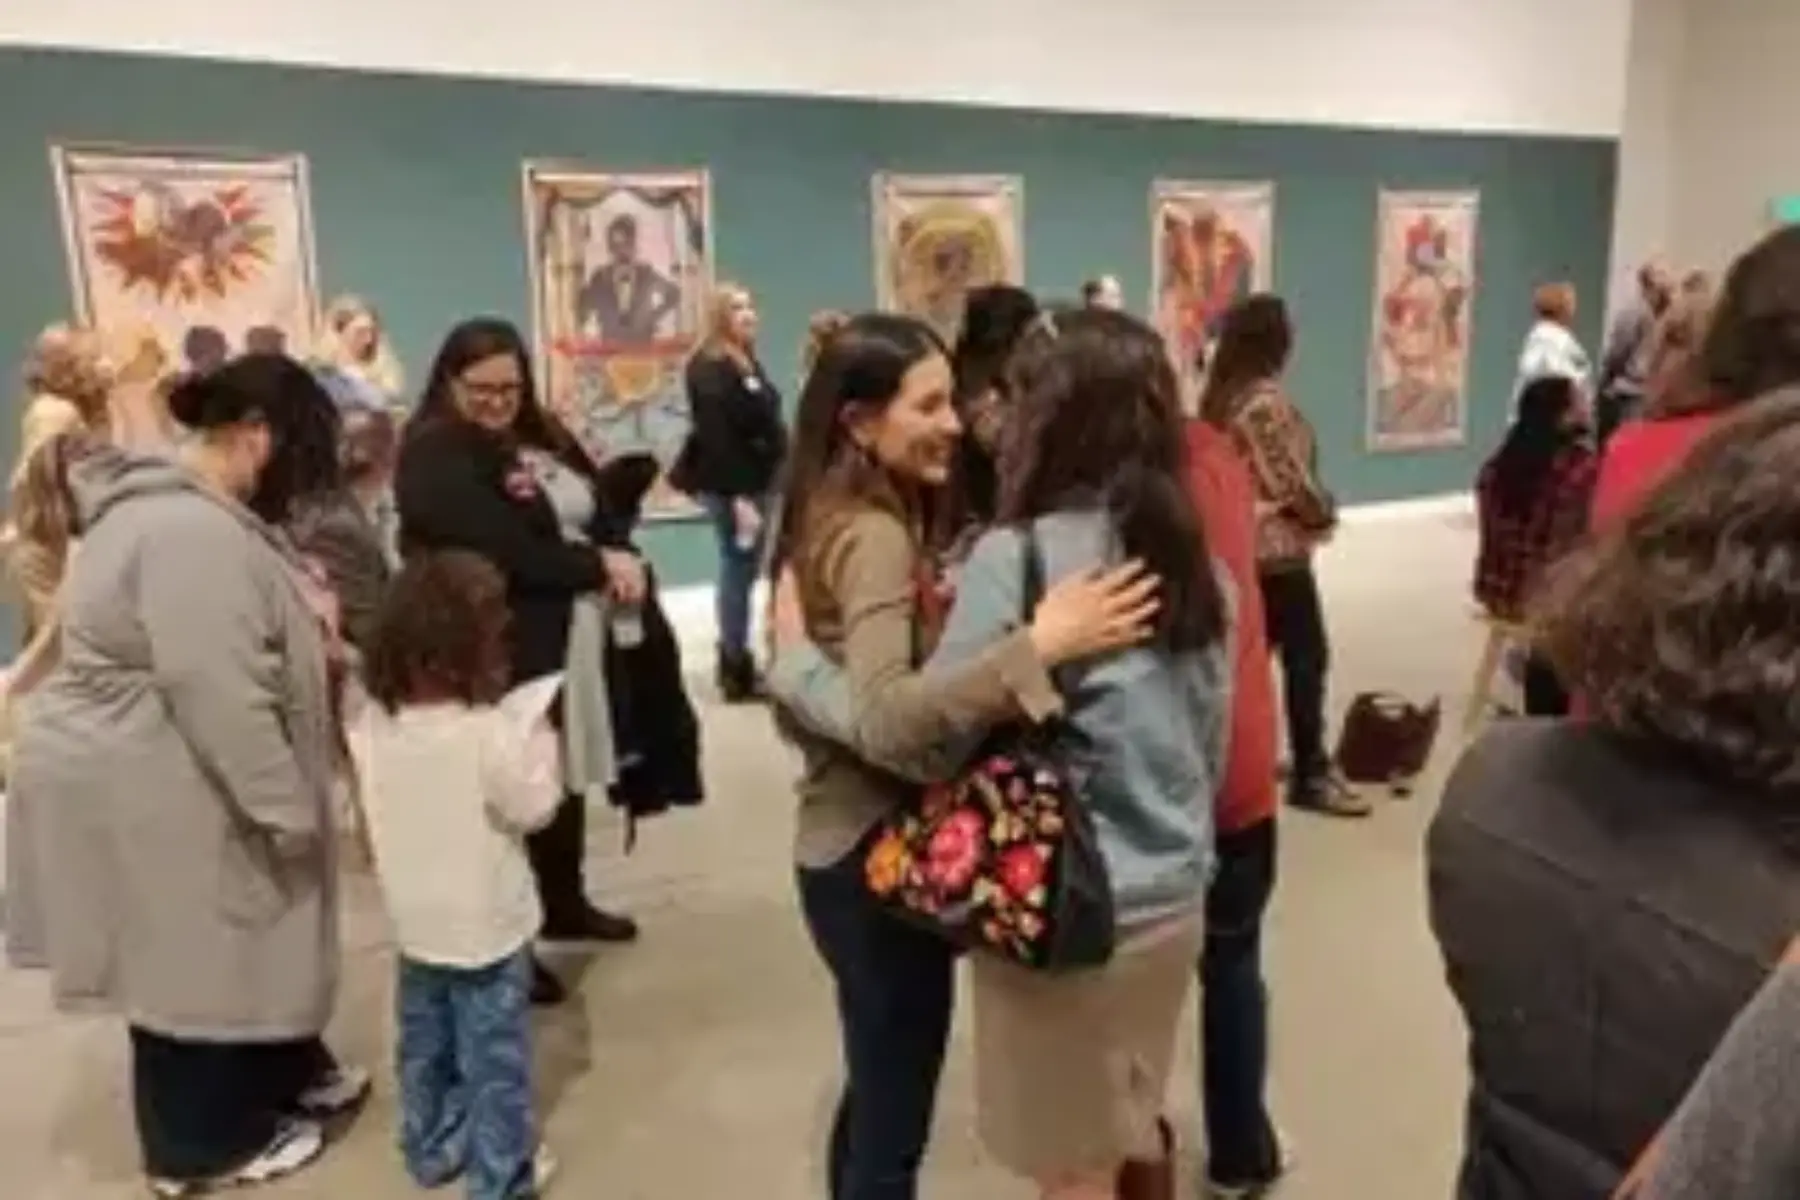 A group of people at an art event